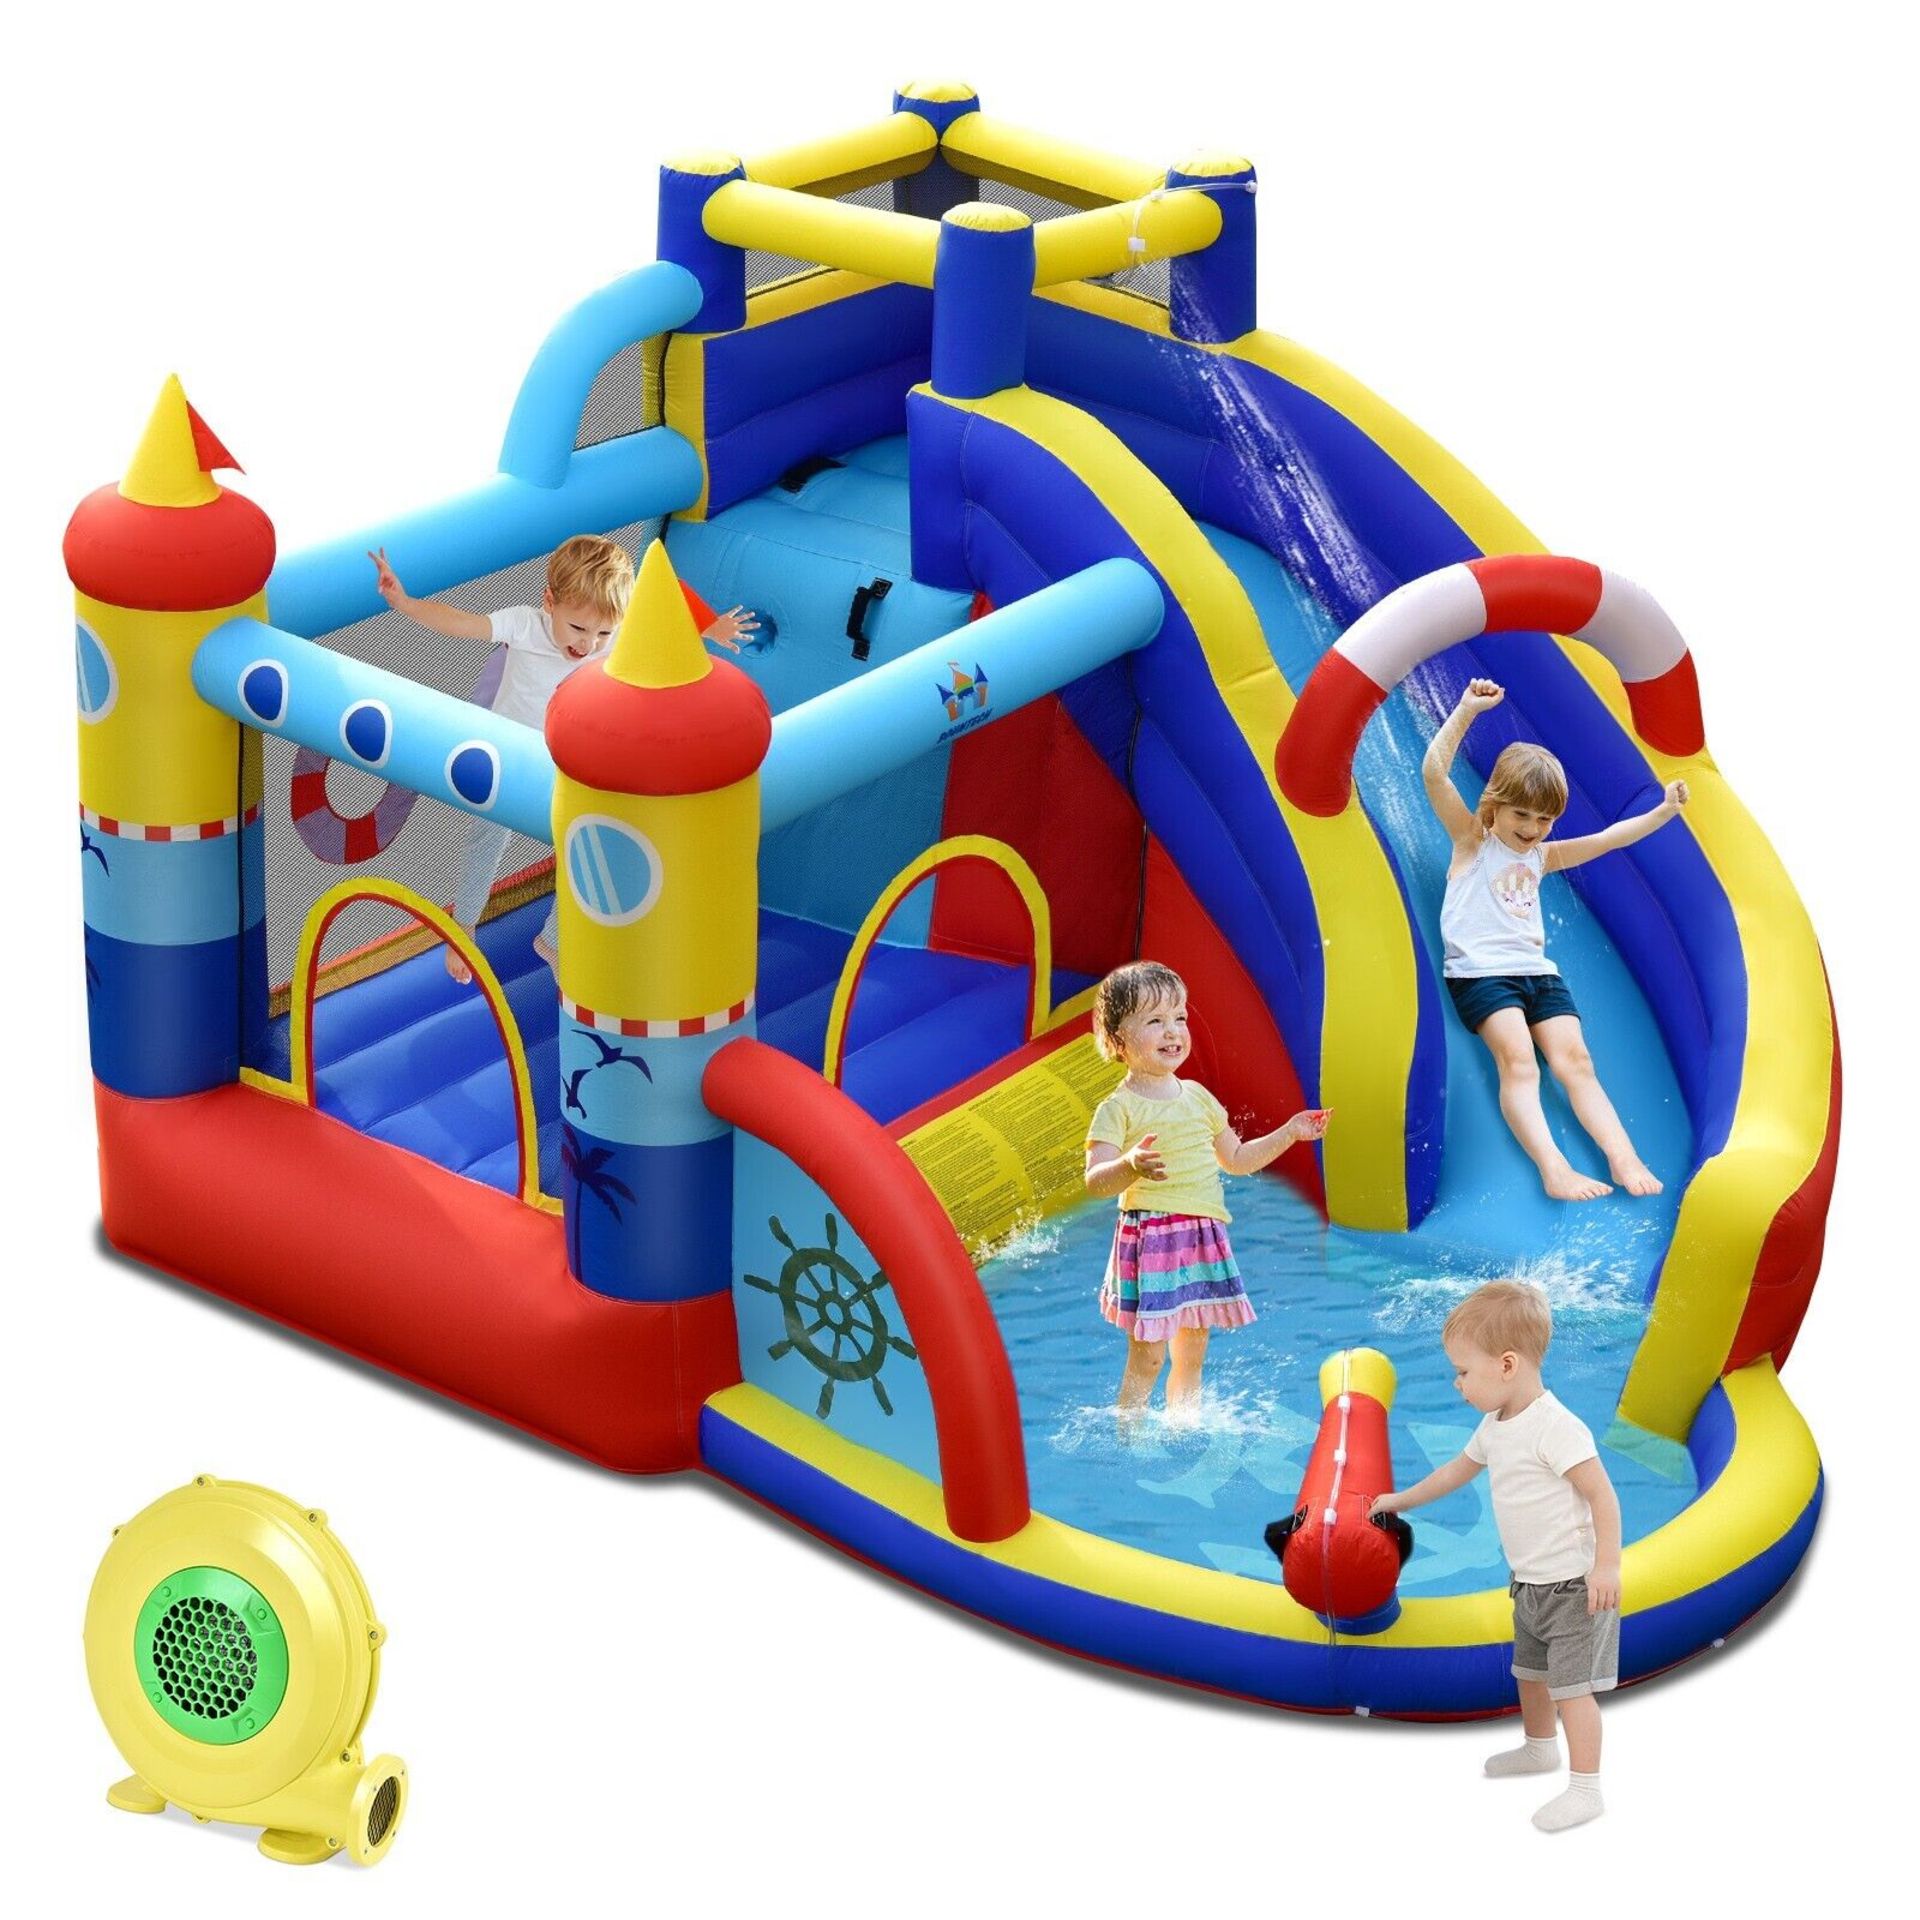 NEW INFLATABLE BOUNCY CASTLE WATER PARK BOUNCE HOUSE WATER SLIDES WITH 480W BLOWER - Image 7 of 7